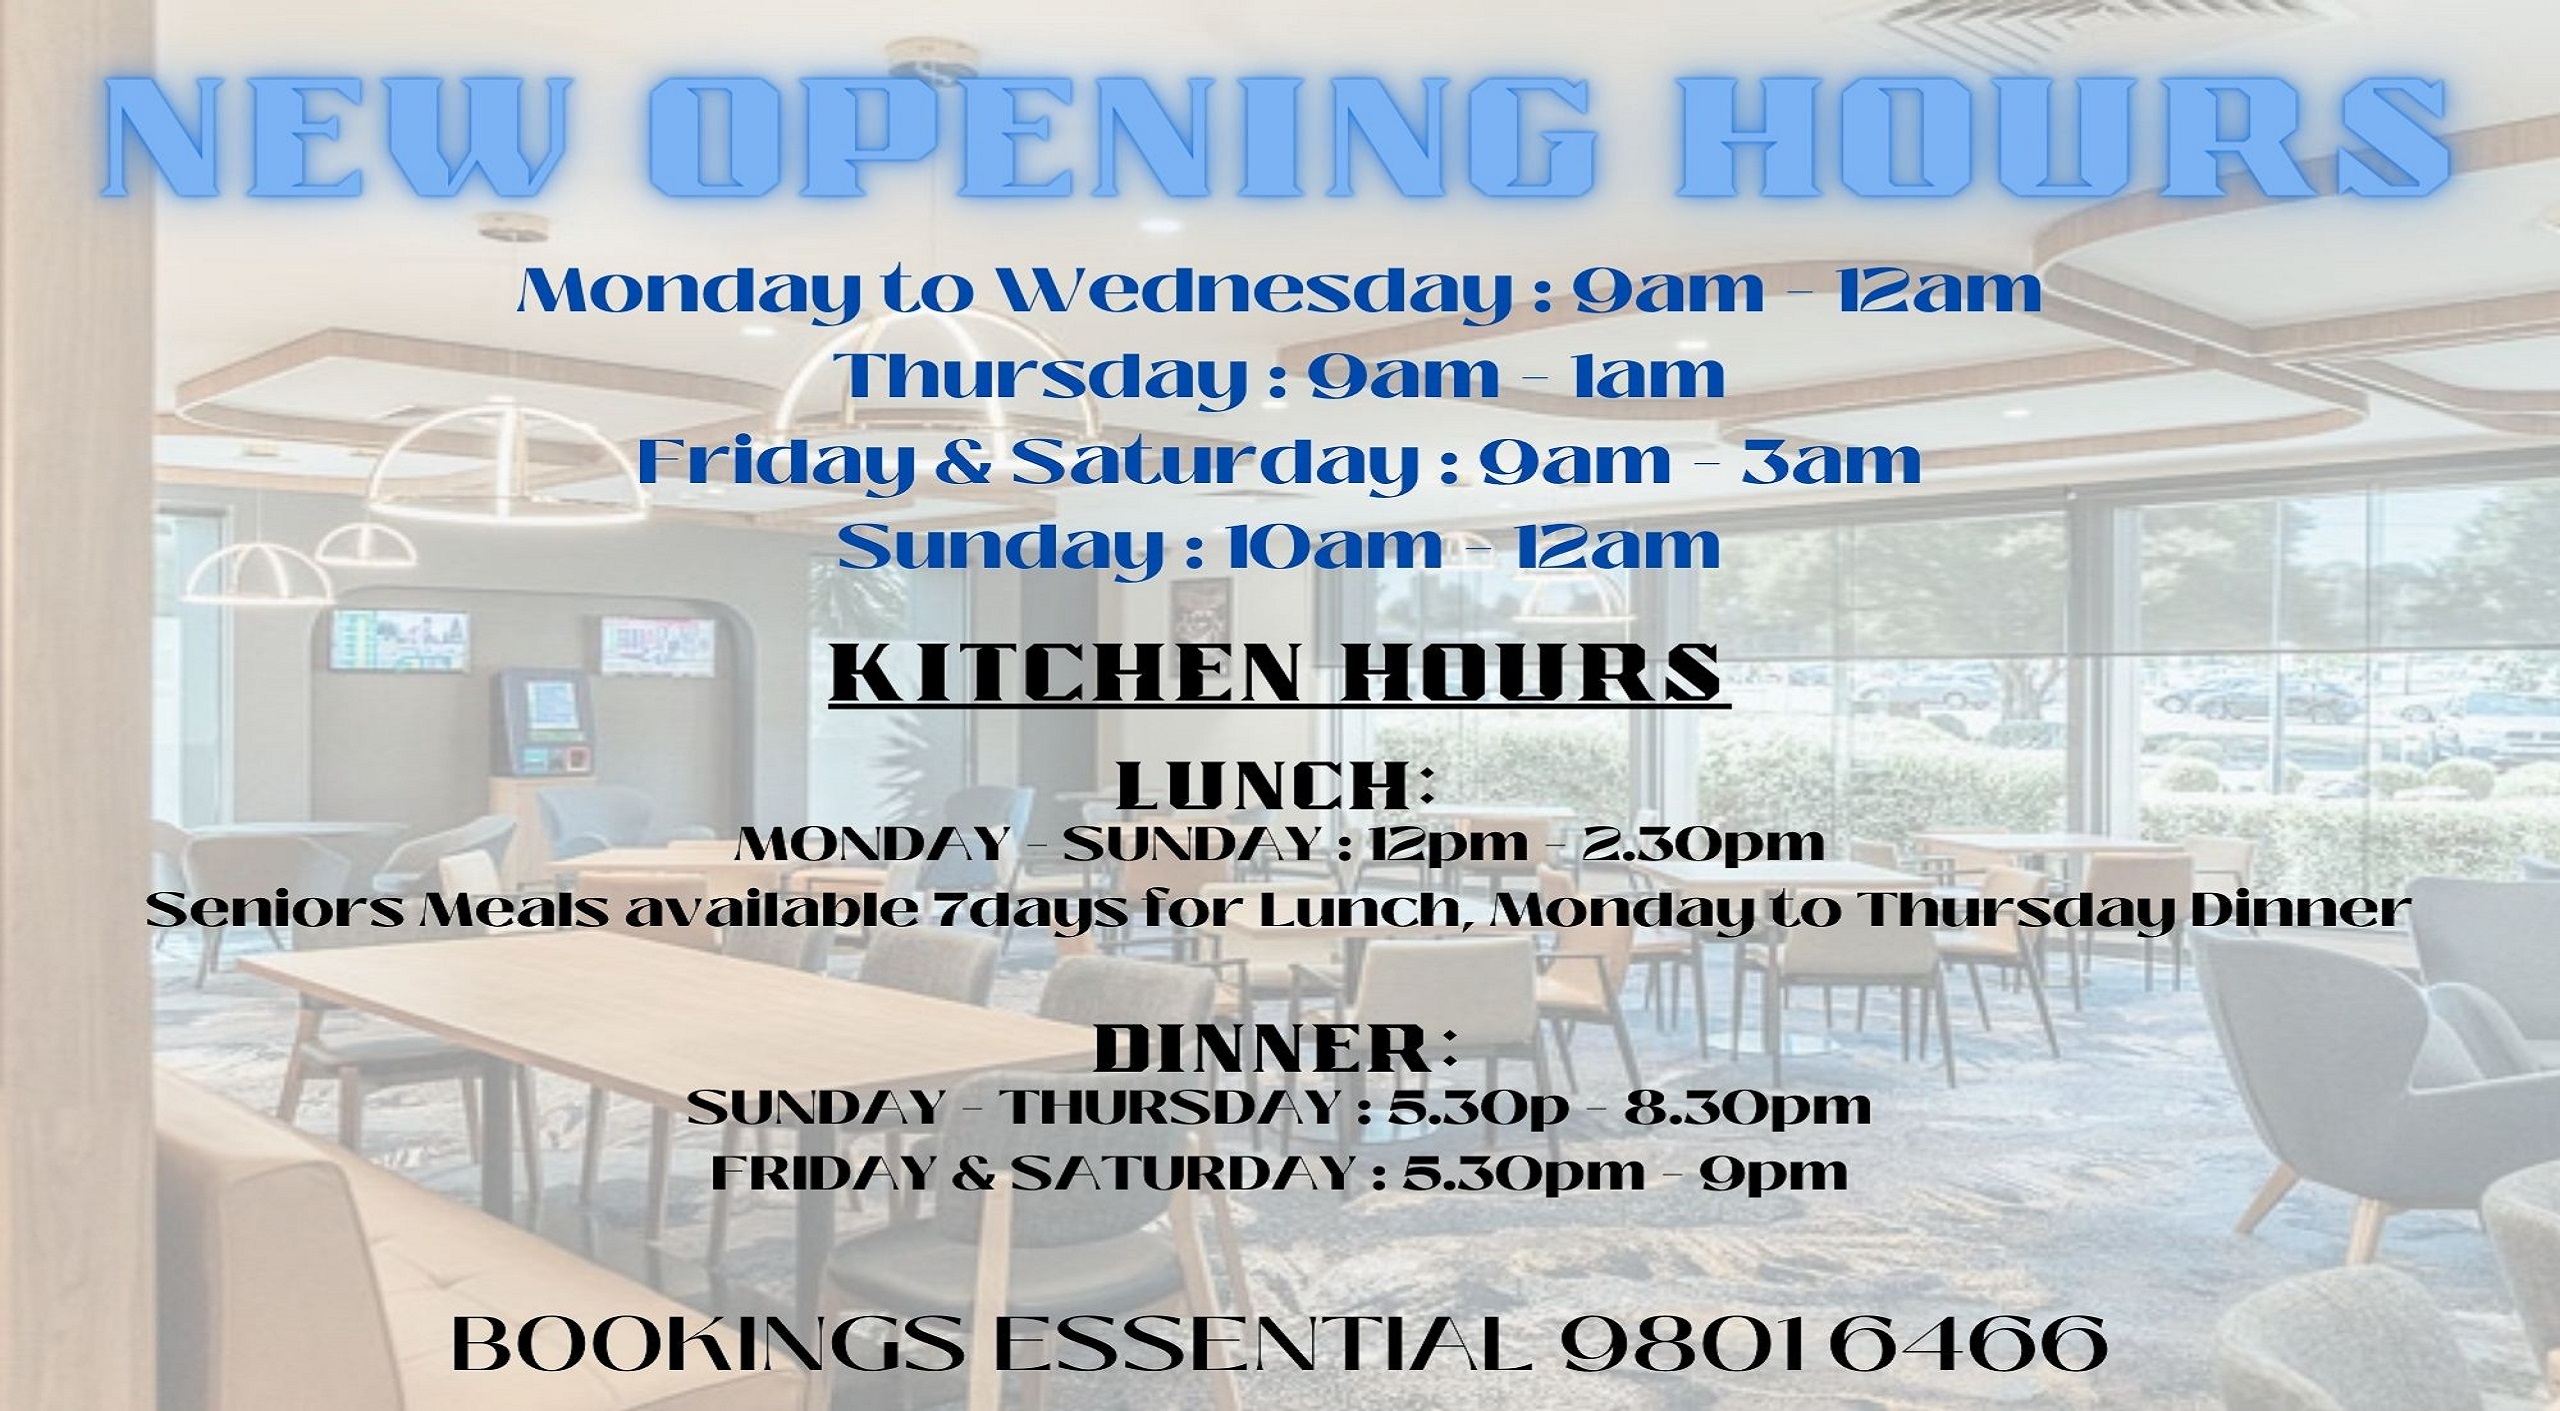 NEW OPENING HOURS july 22